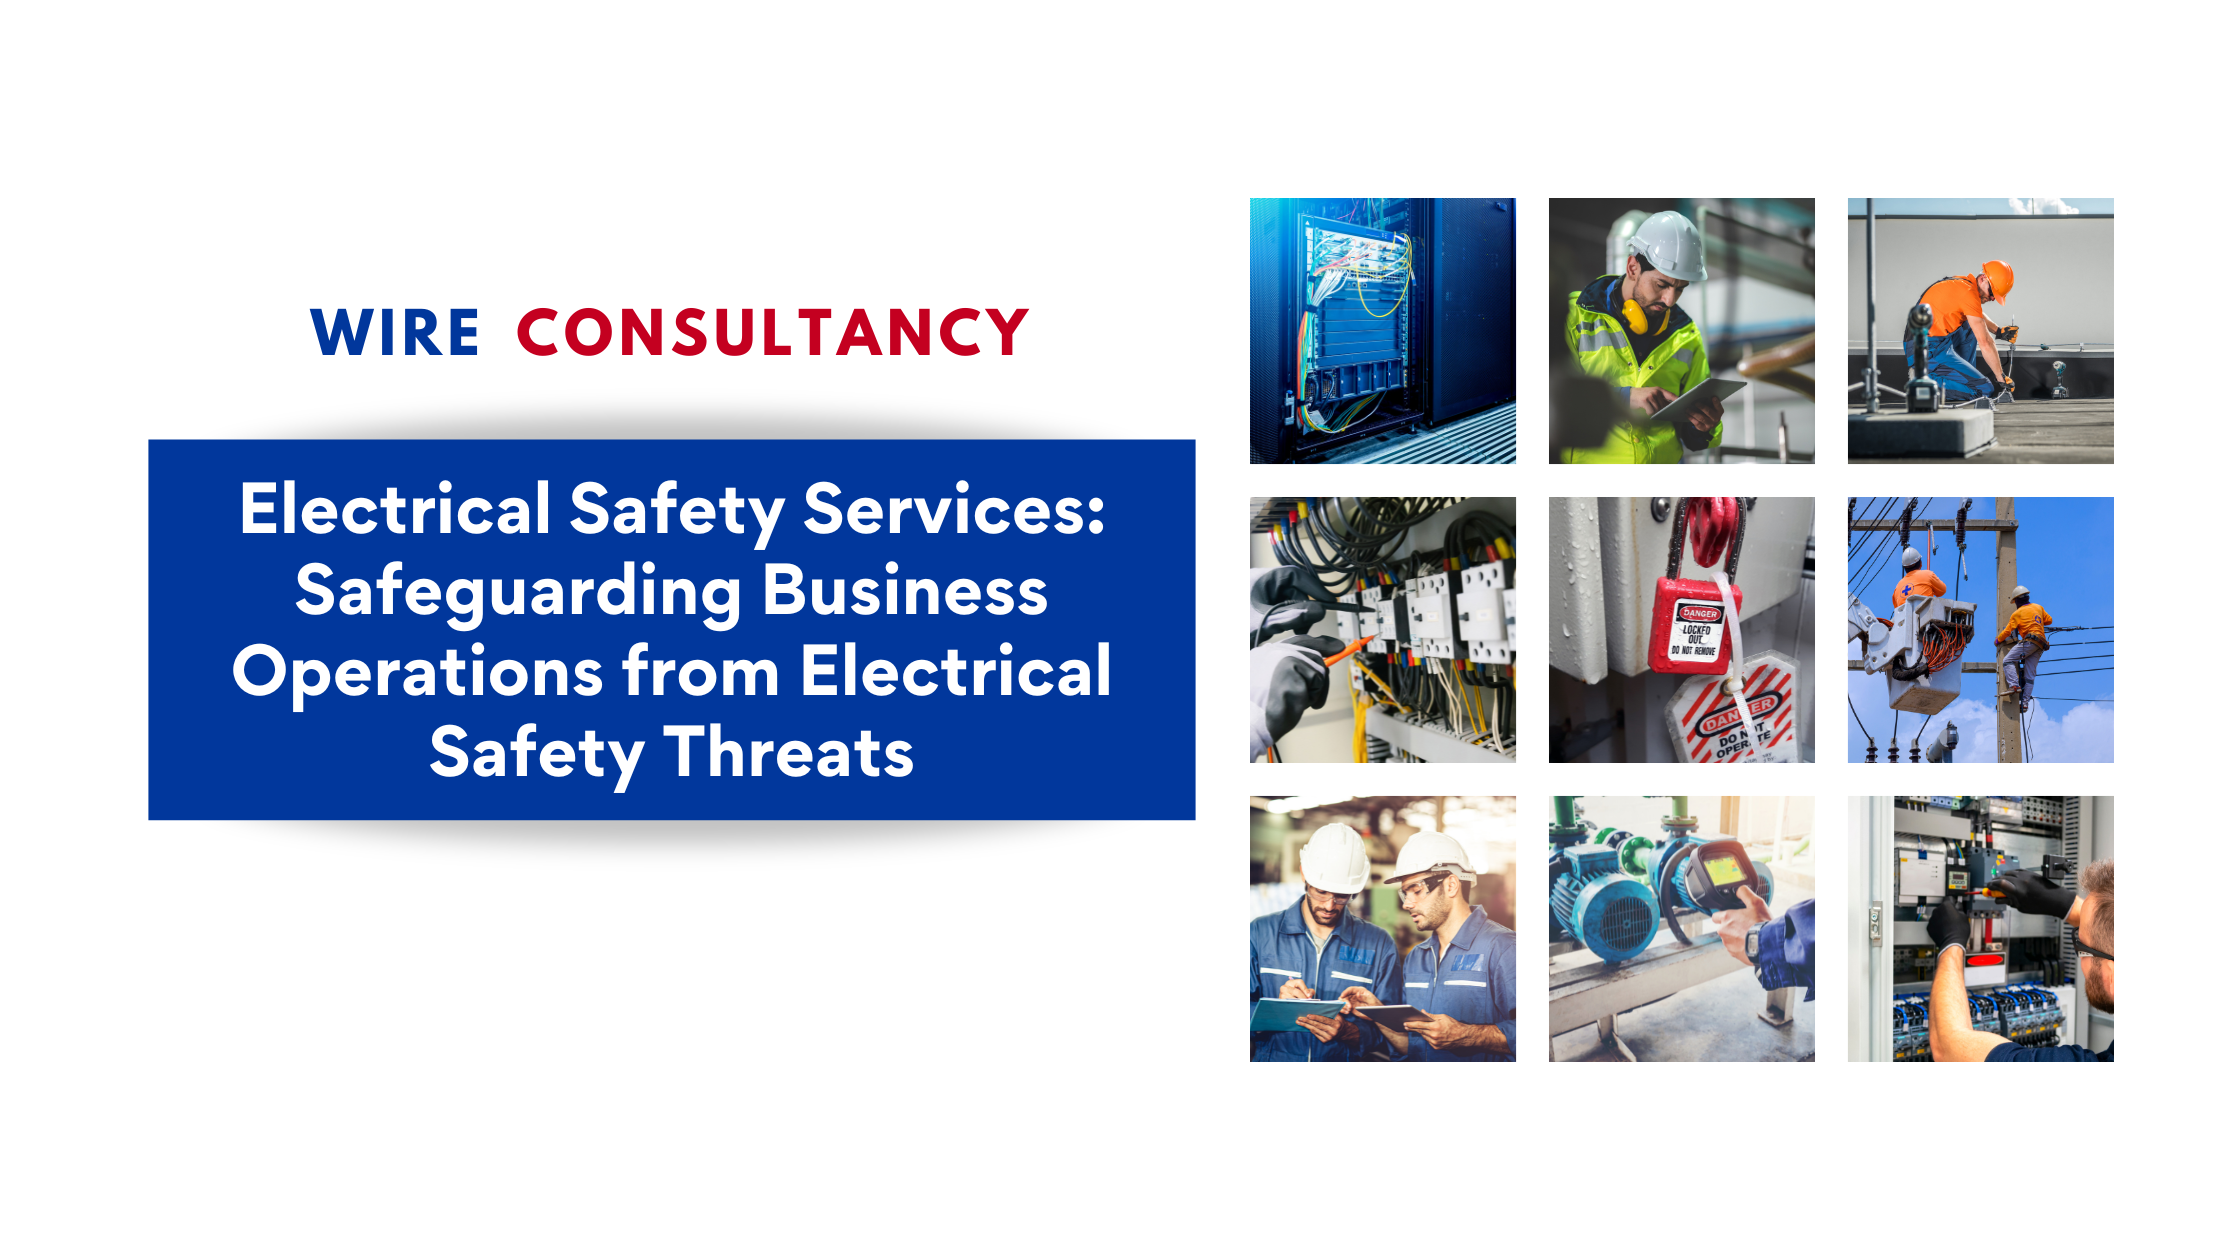 Electrical Safety Services: Safeguarding Business Operations from Electrical Safety Threats